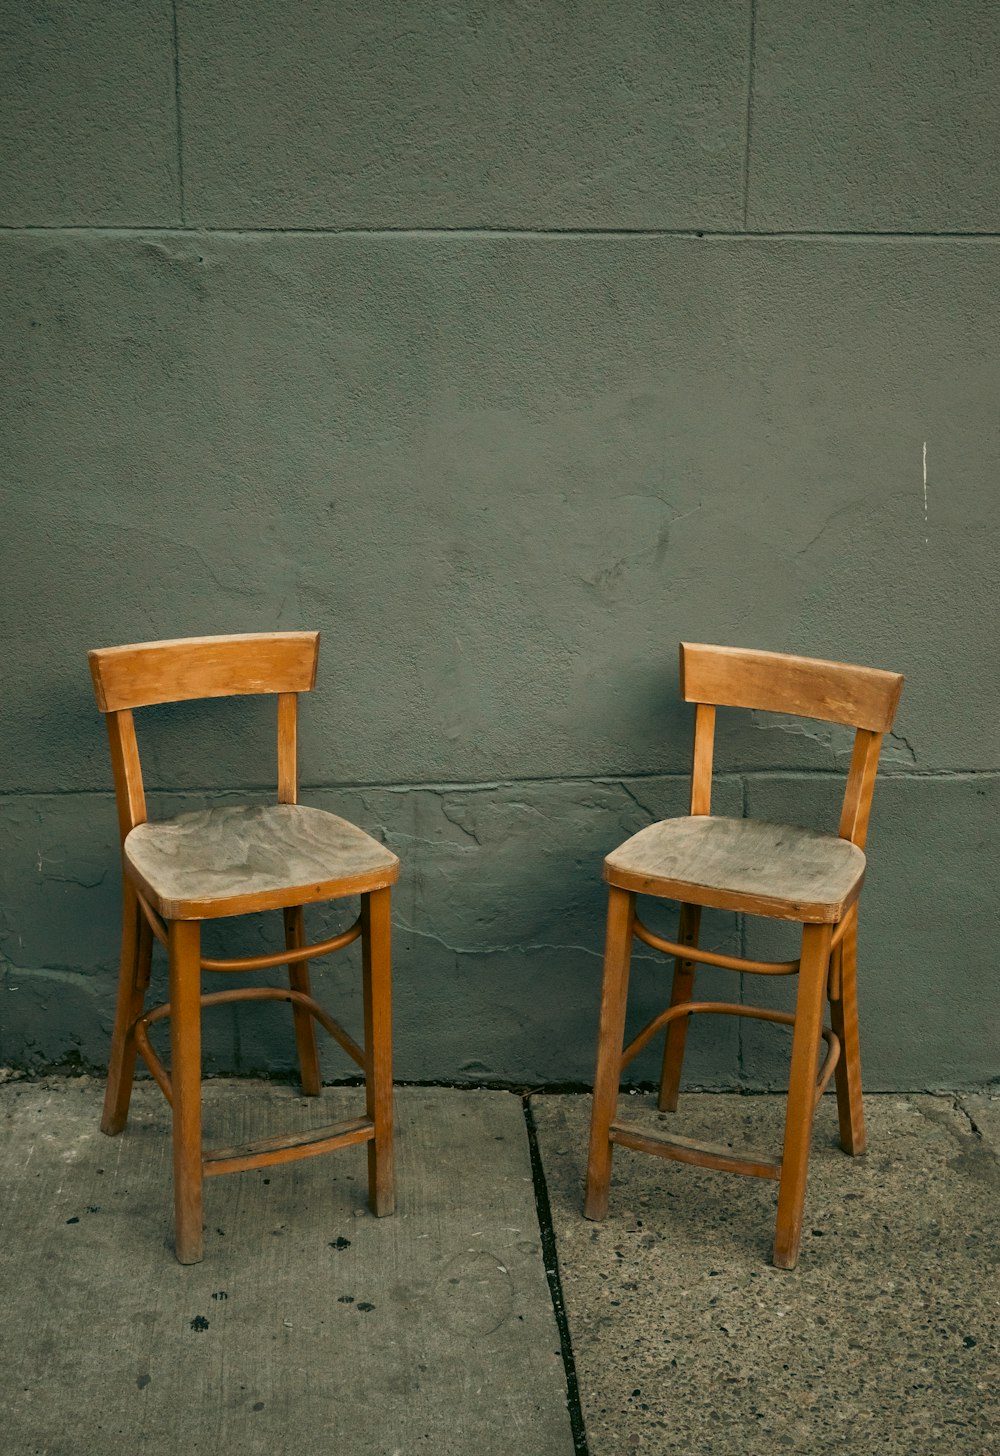 two chairs next to each other